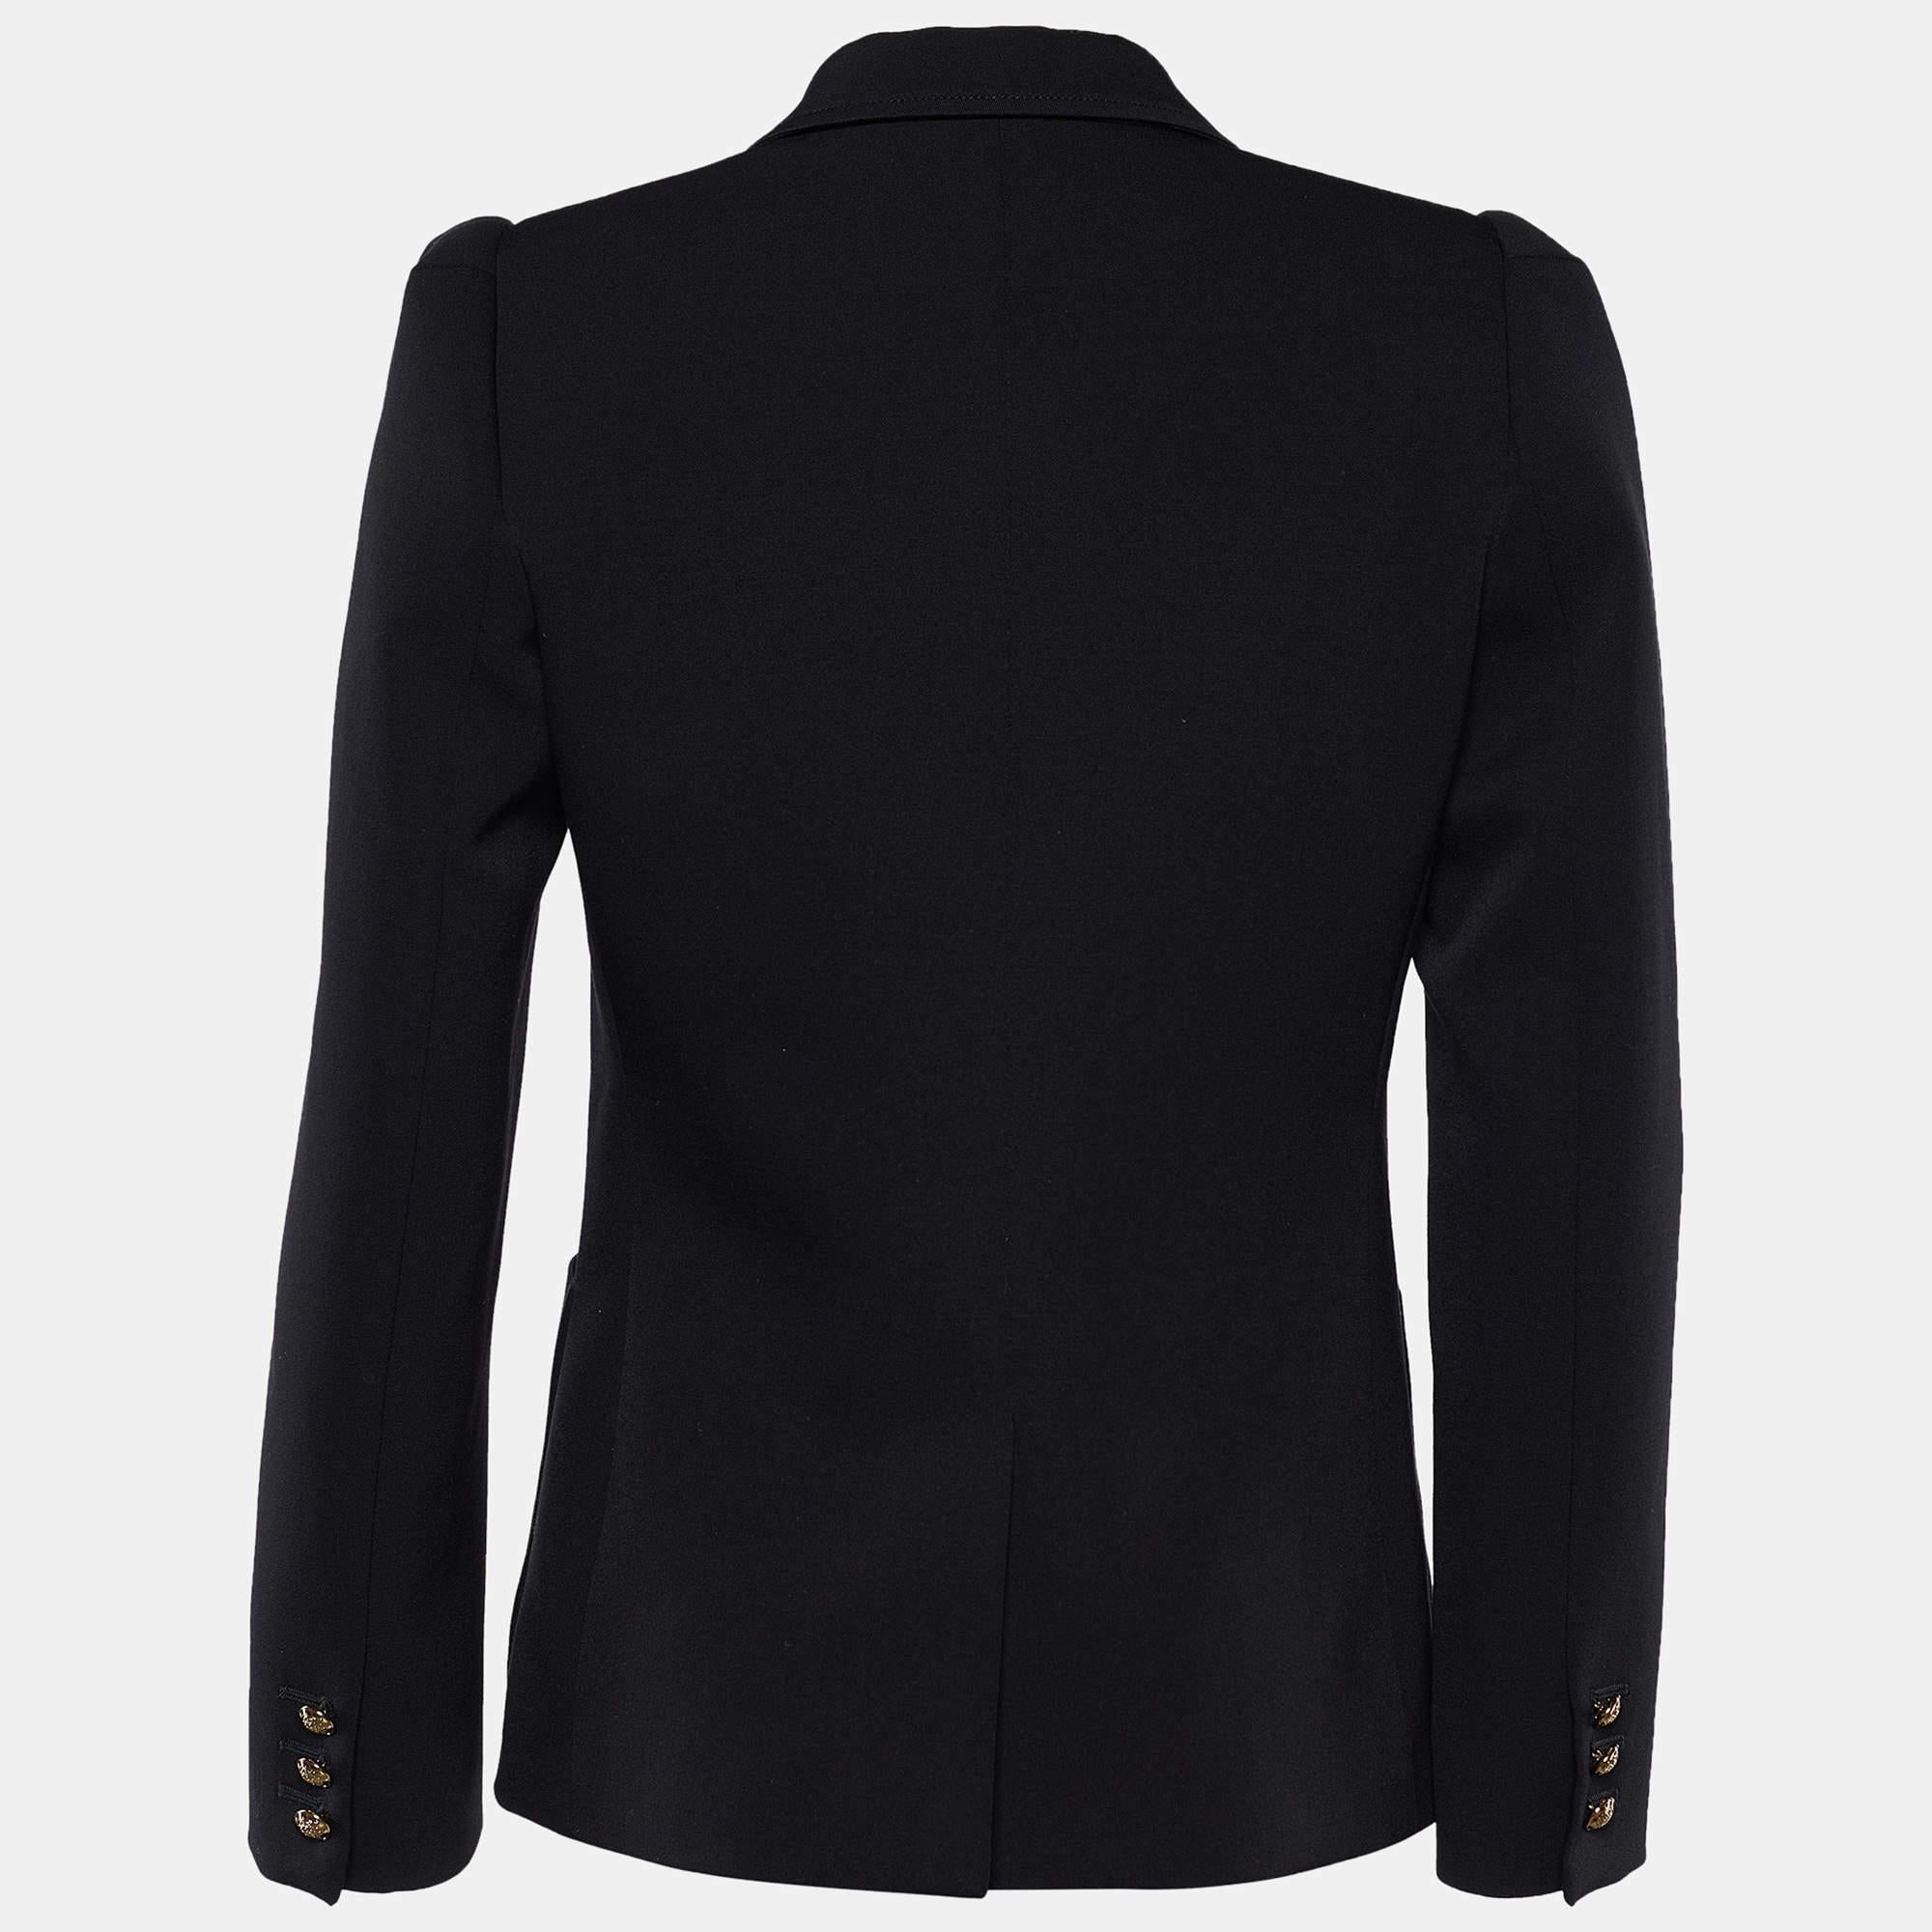 Make space in your closet for this uber-chic blazer from Roberto Cavalli. Created luxuriously from black cotton, the versatile piece has long sleeves and buttons at the front. External pockets along with a well-structured silhouette make it suitable